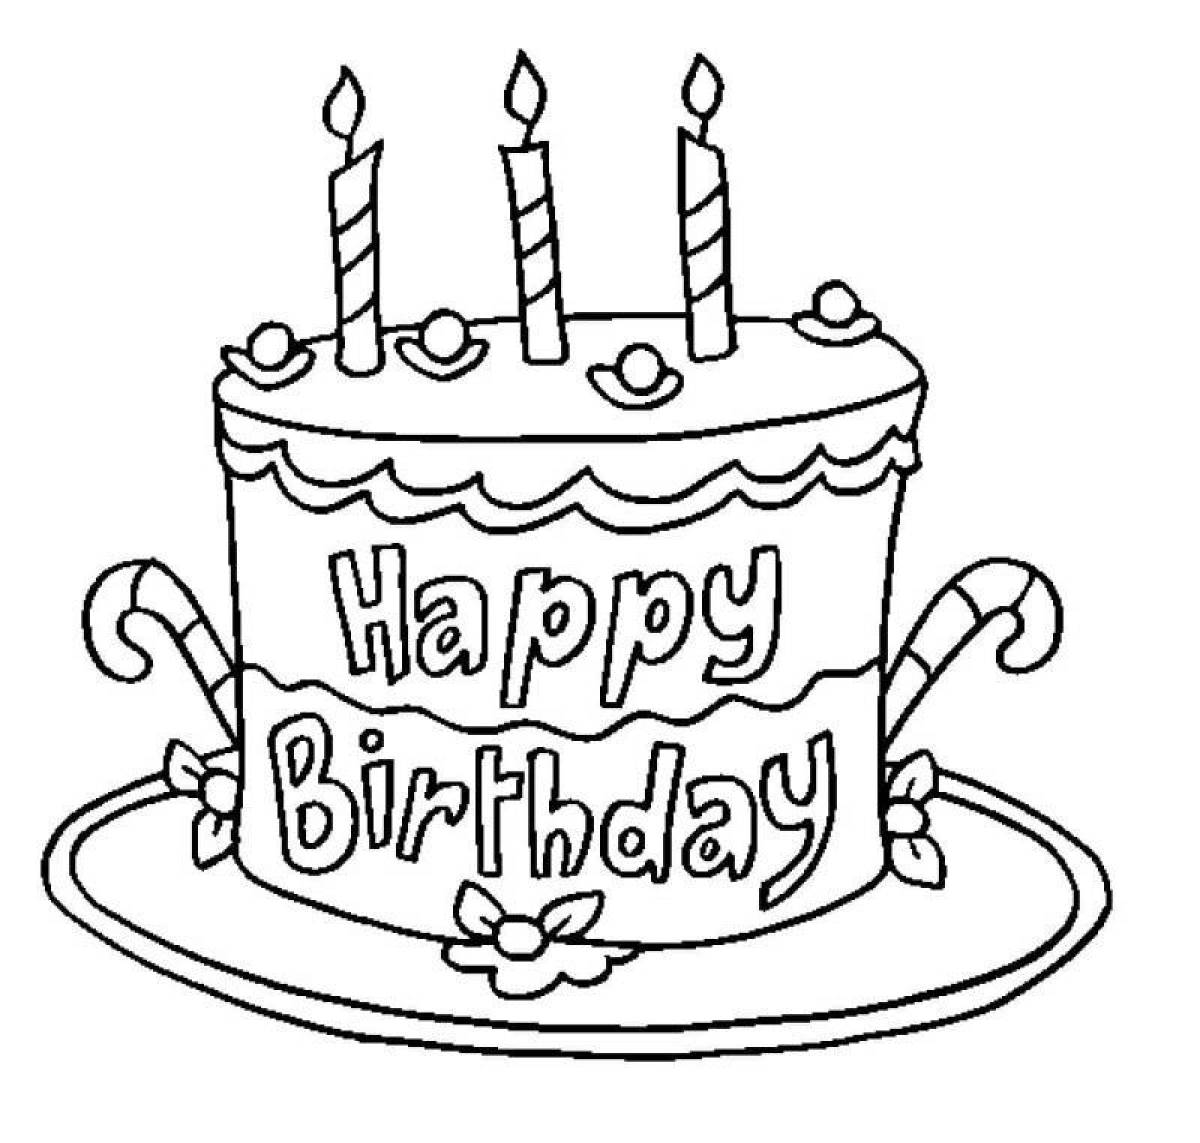 Glitter happy birthday dad coloring page